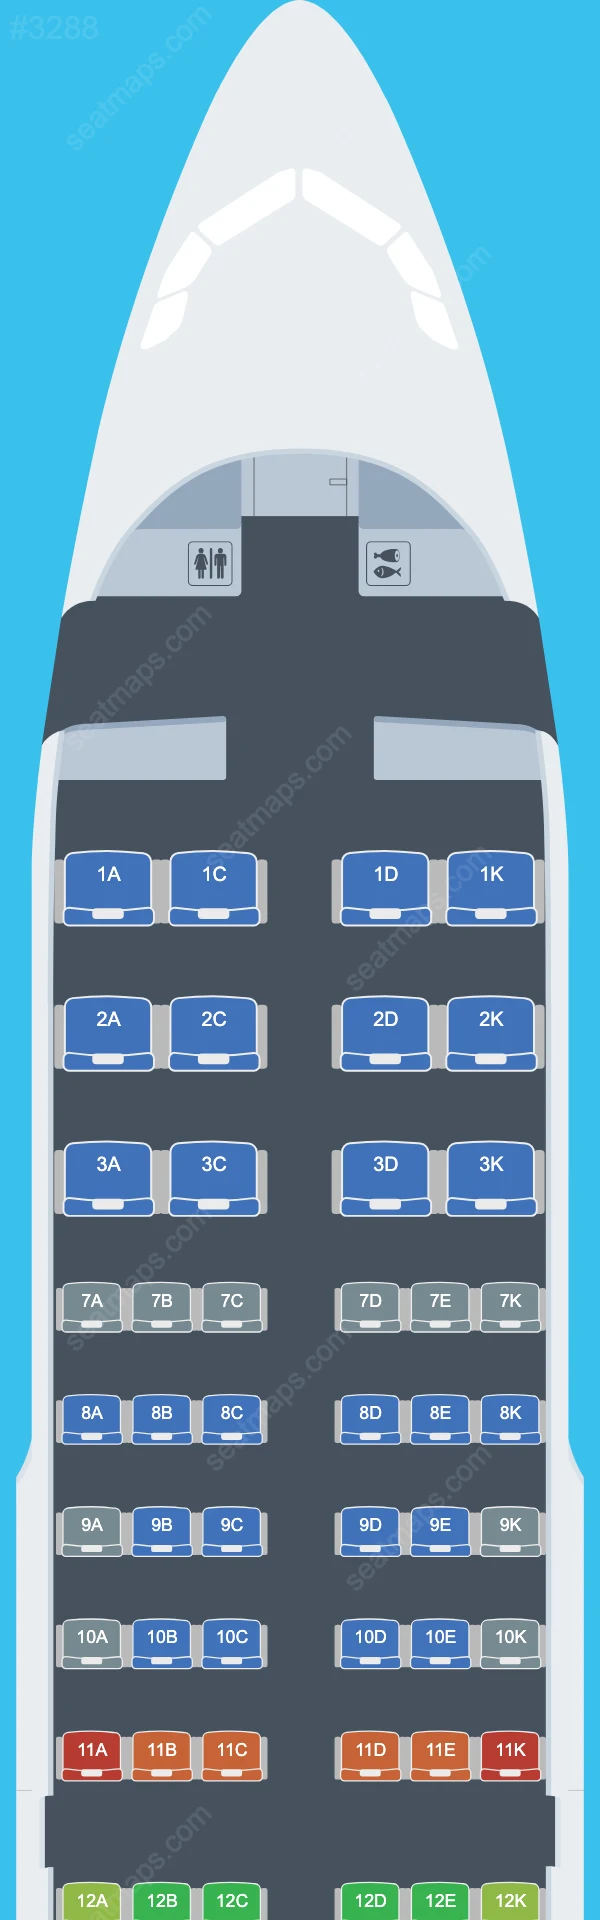 Avianca Airbus A319 Seat Maps A319-100